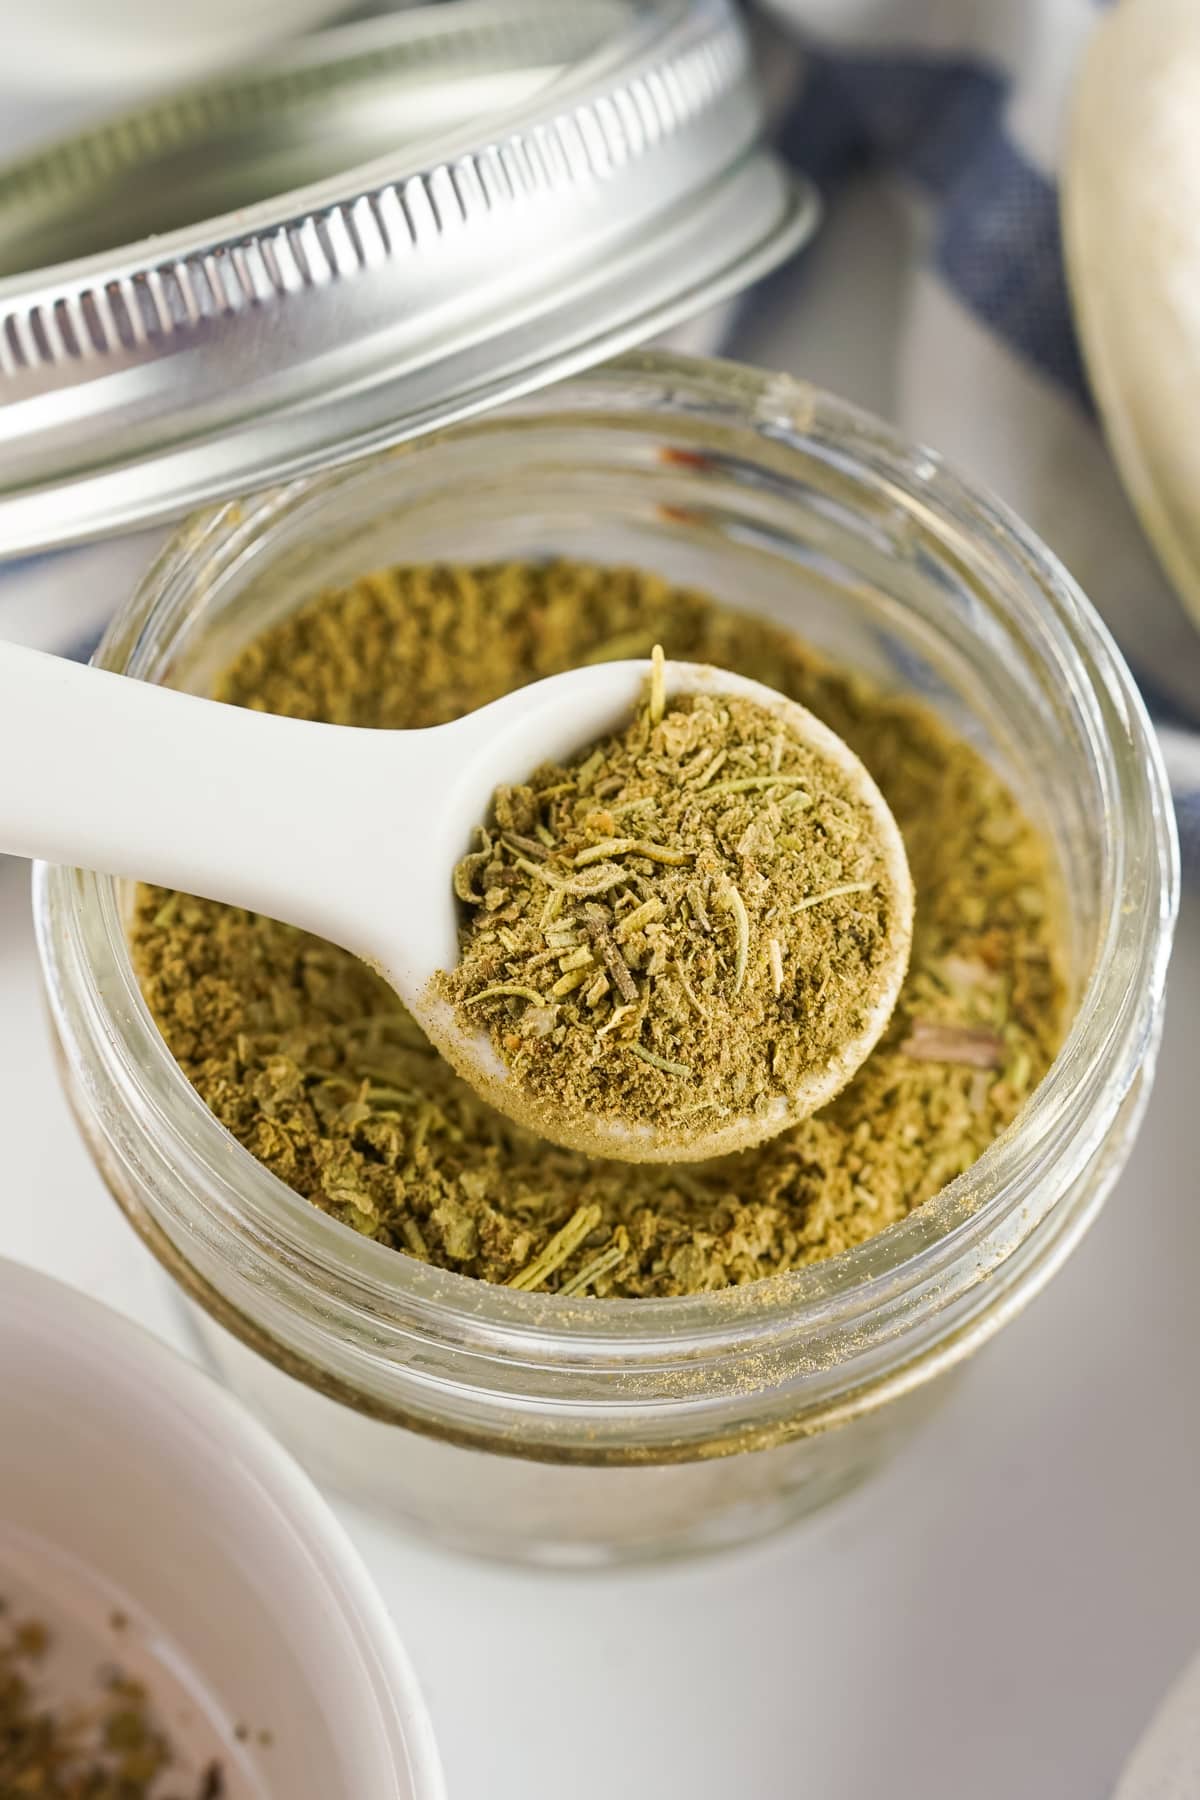 A spoonful of Poultry Seasoning in a jar.